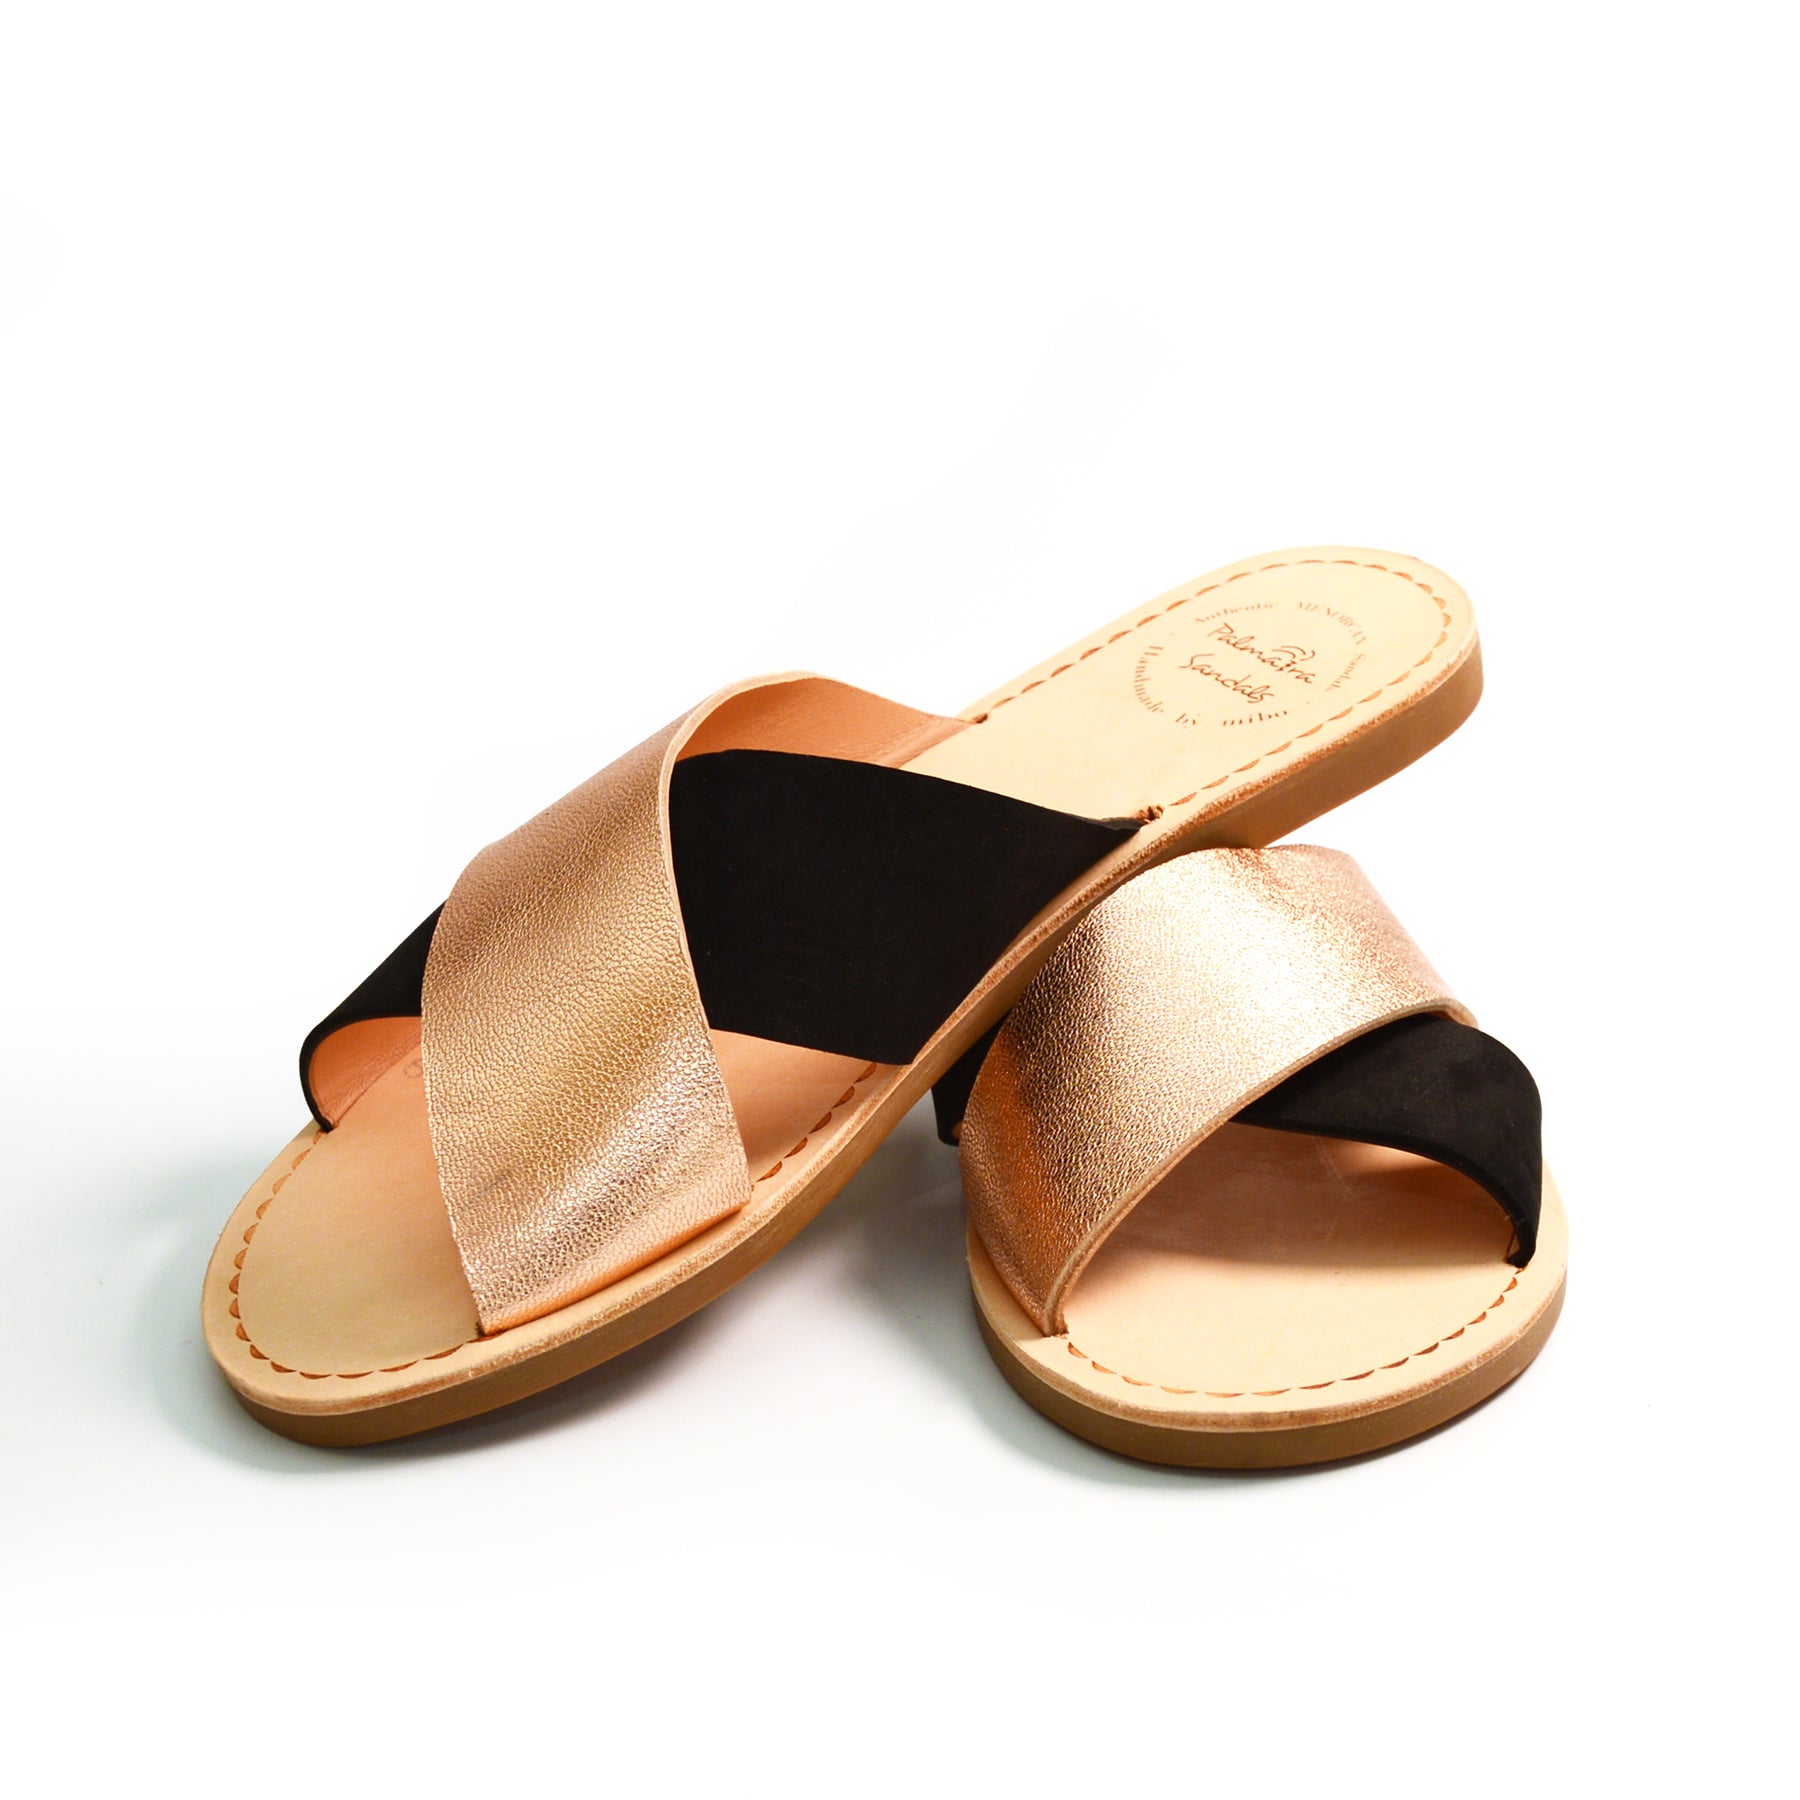 black suede and rose gold metallic straps on a flat crossover slide sandals